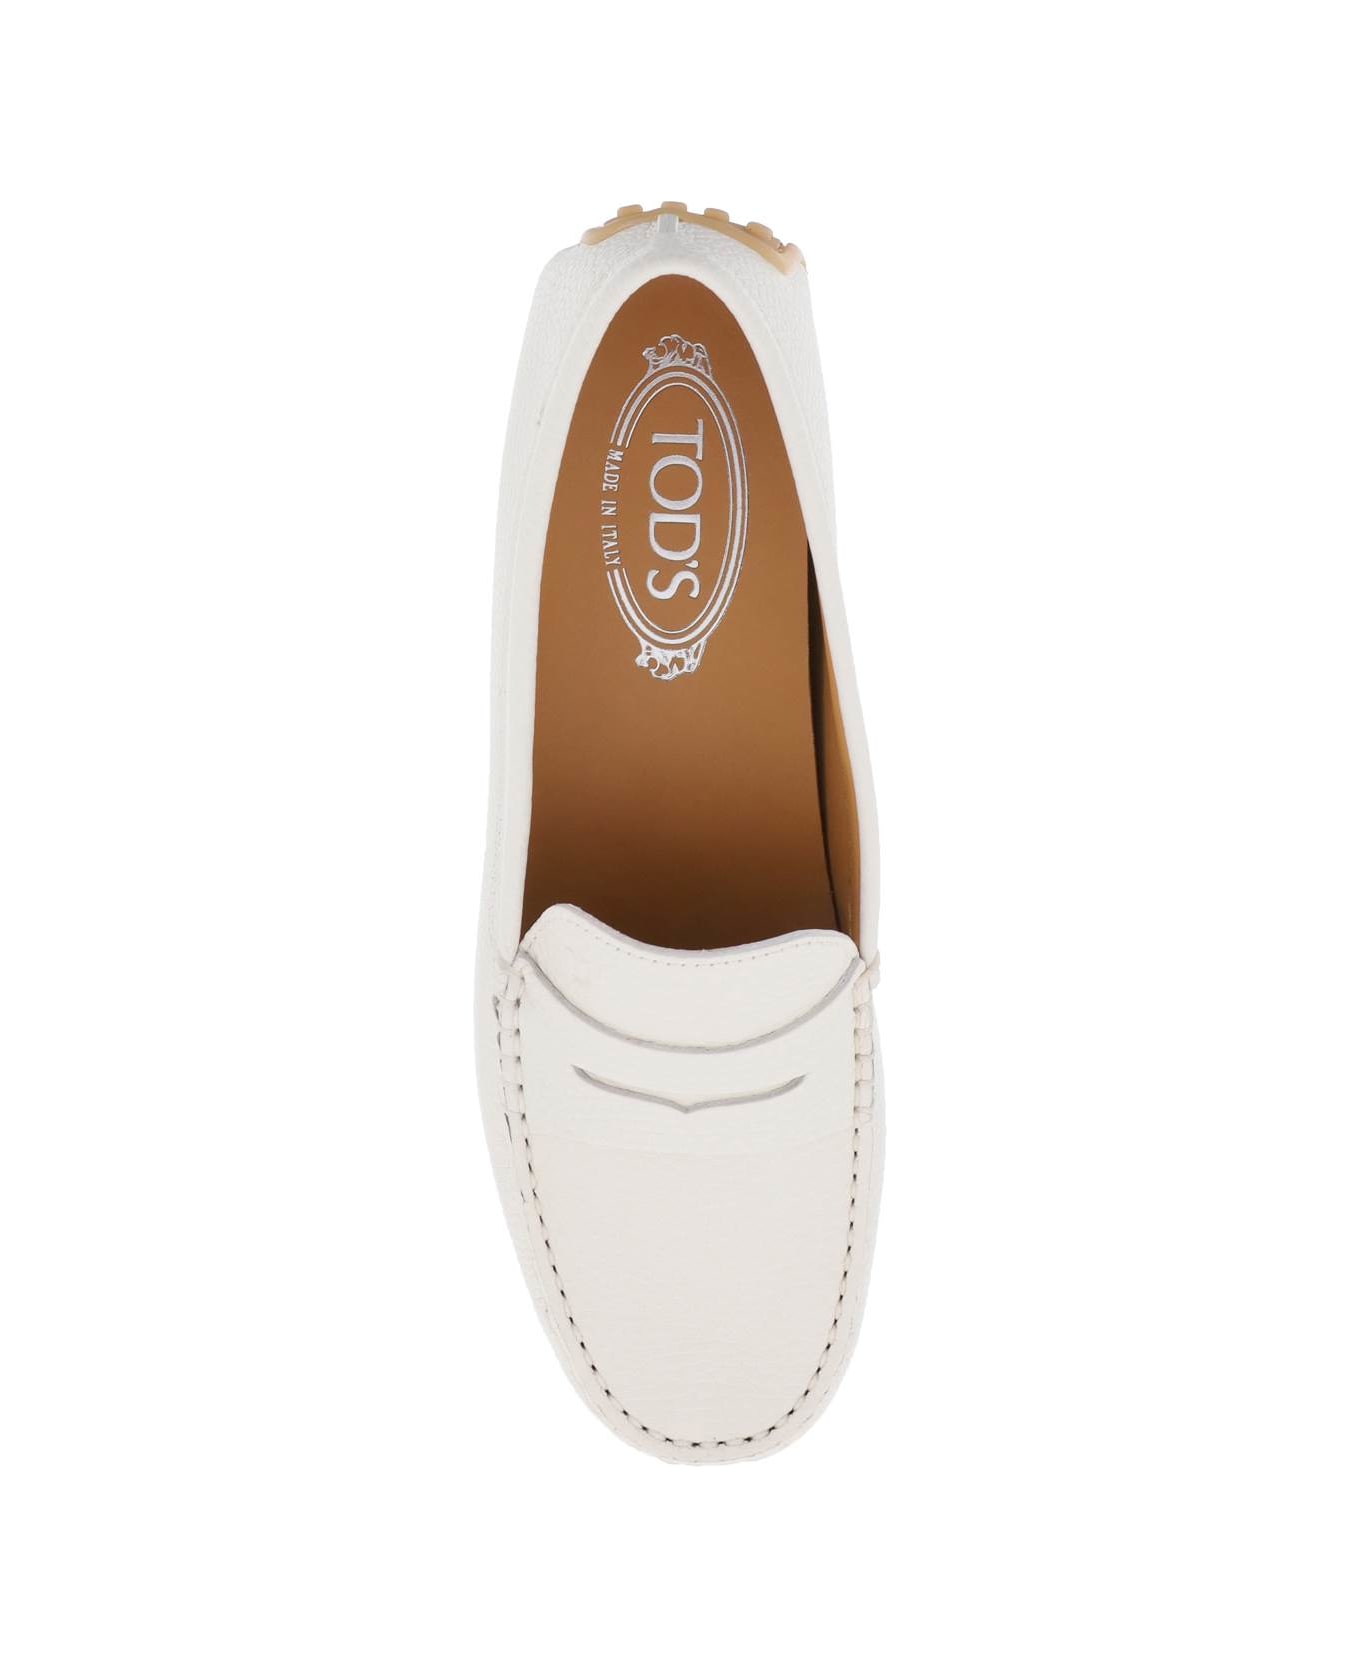 Tod's City Gommino Leather Loafers - MOUSSE (White) フラットシューズ